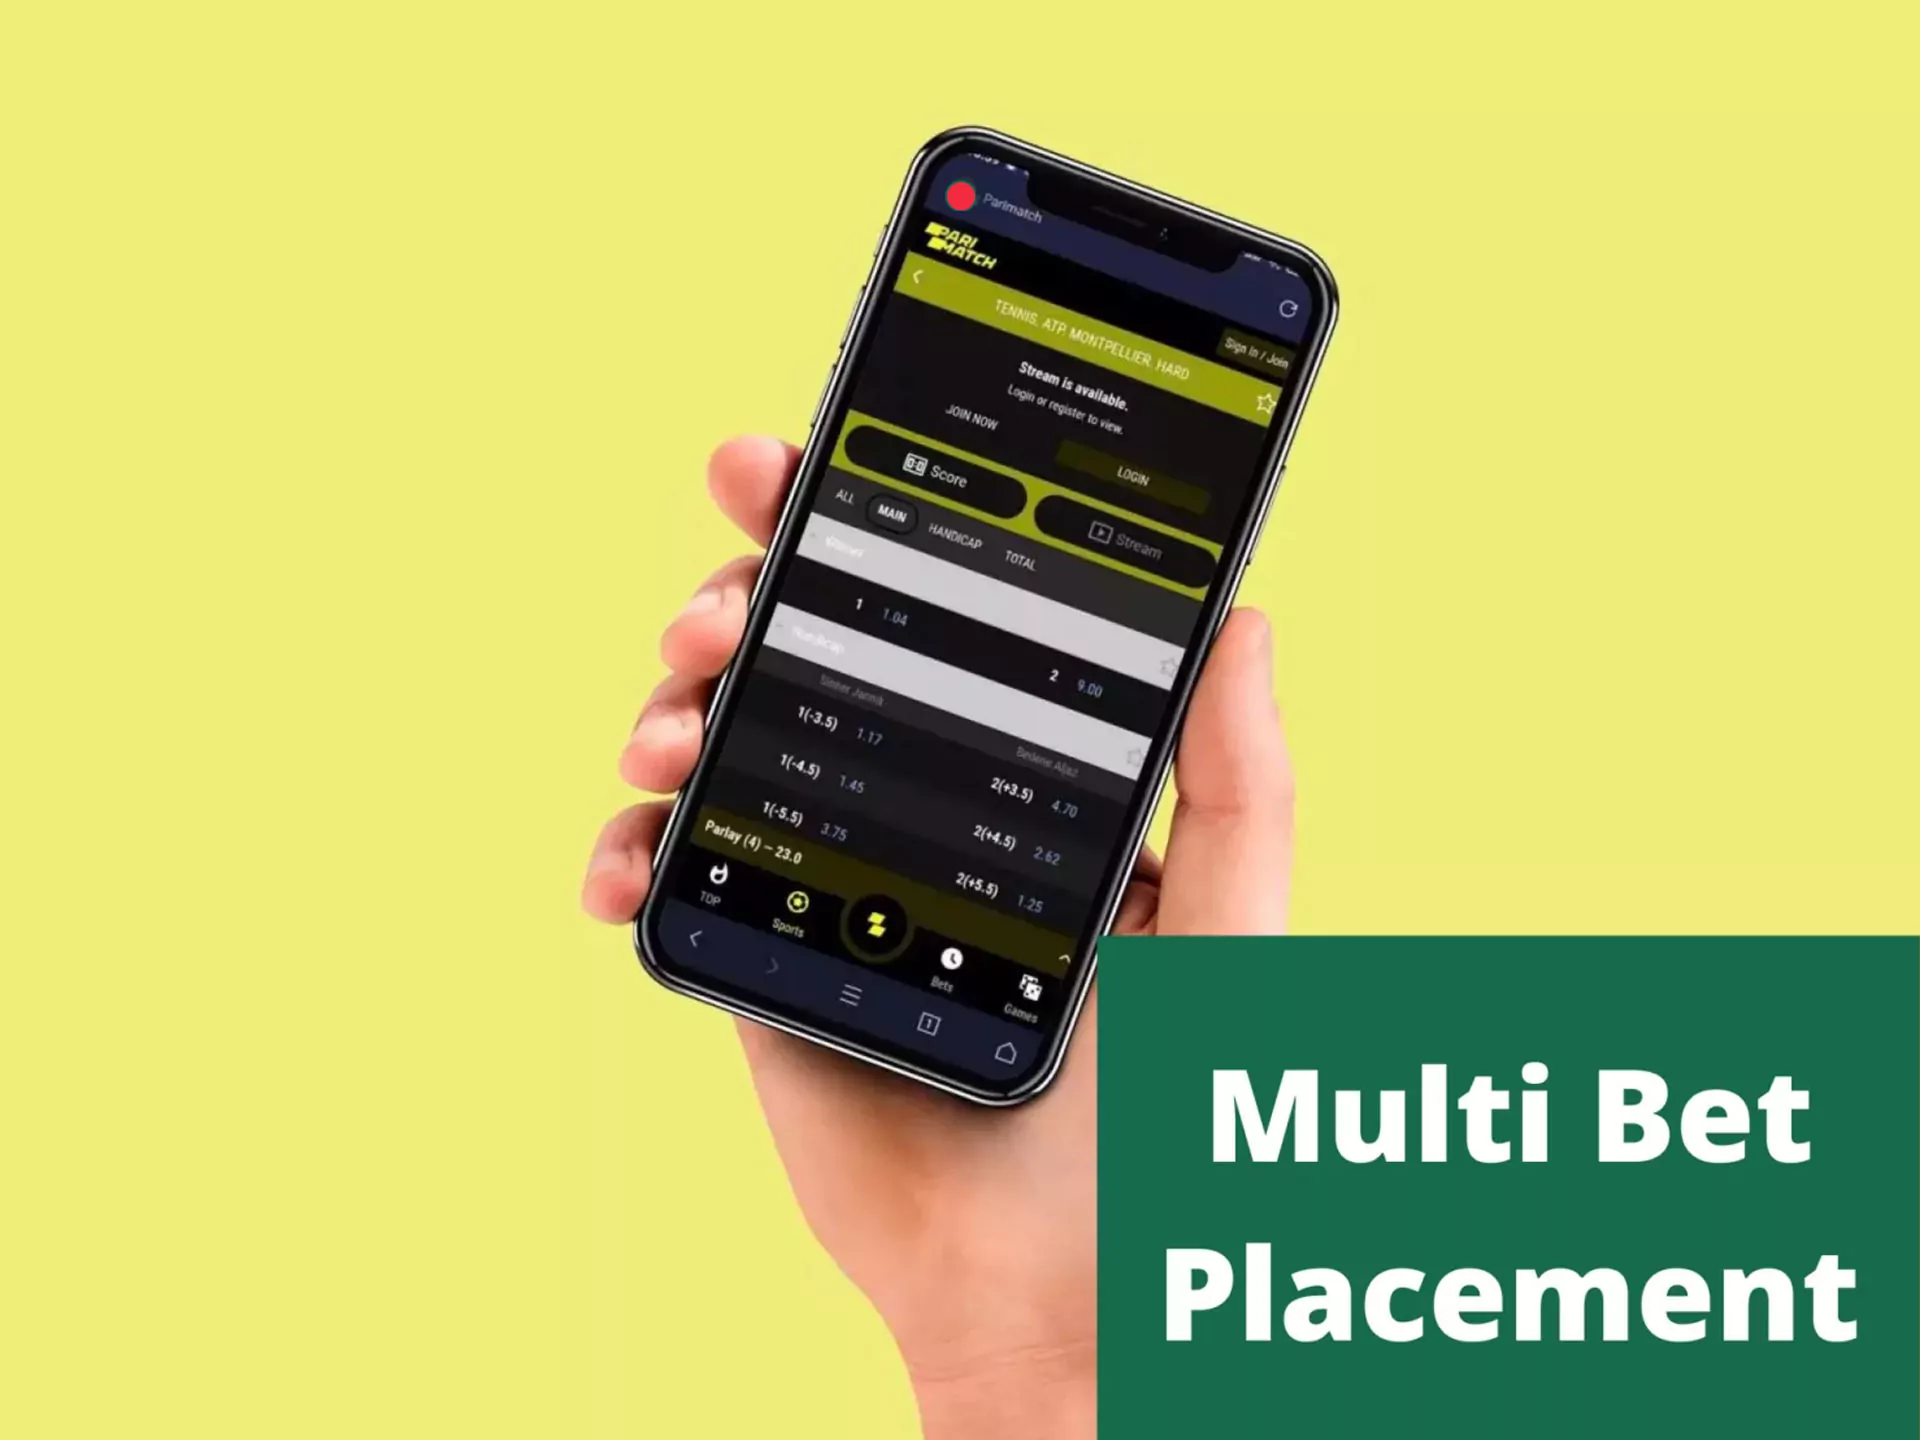 Multi bet placement is available in Parimatch app.